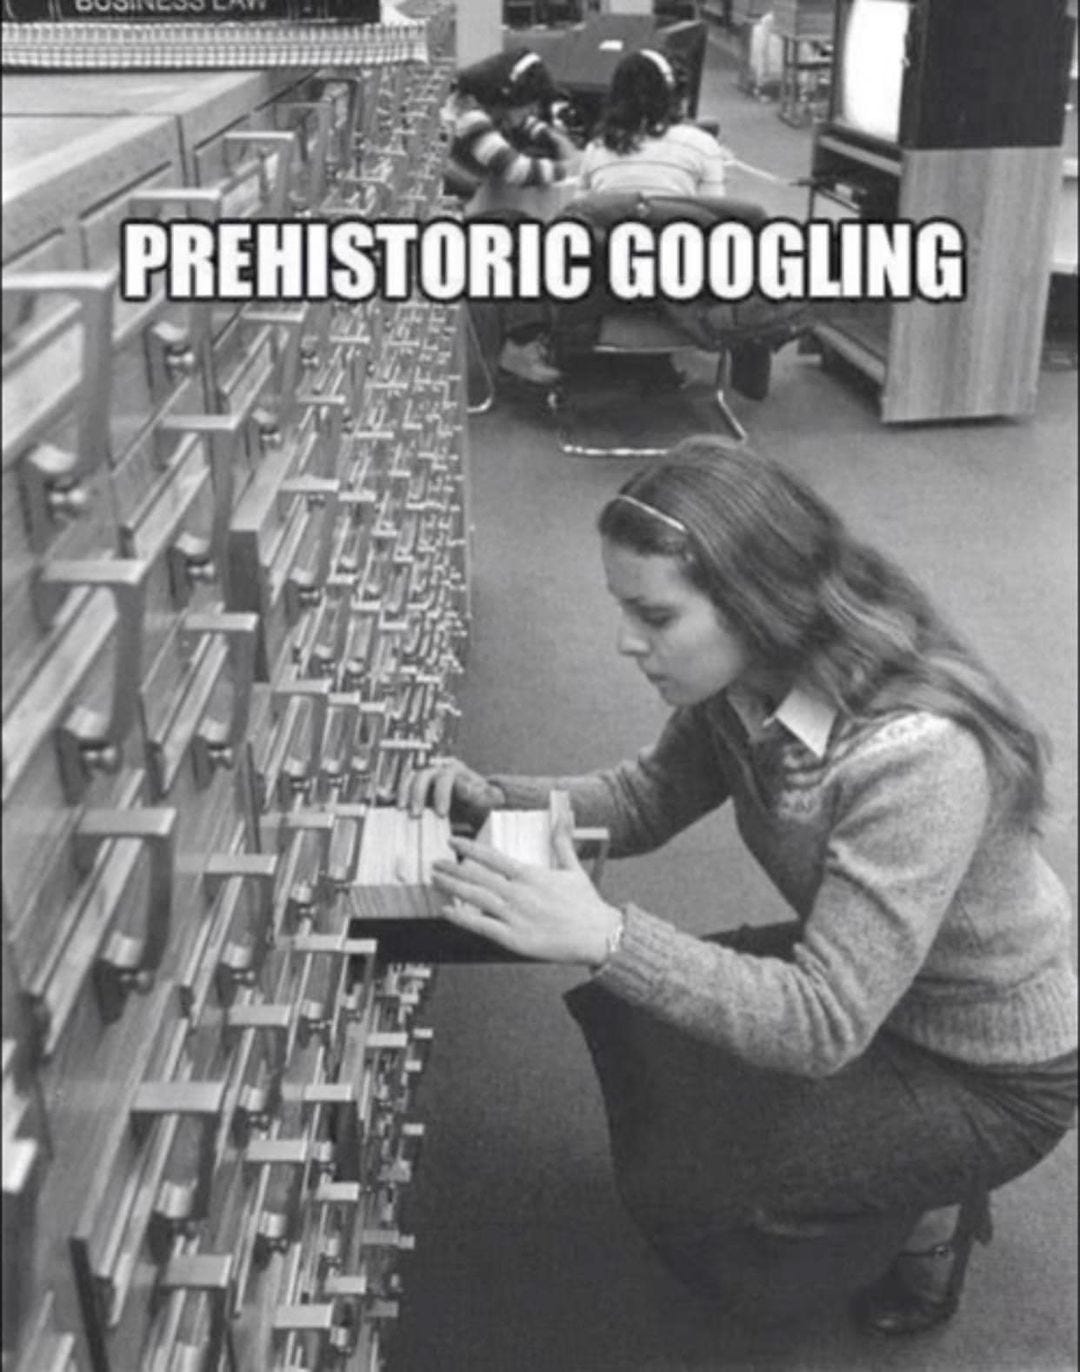 May be an image of 2 people and text that says 'PREHISTORIC GOOGLING'